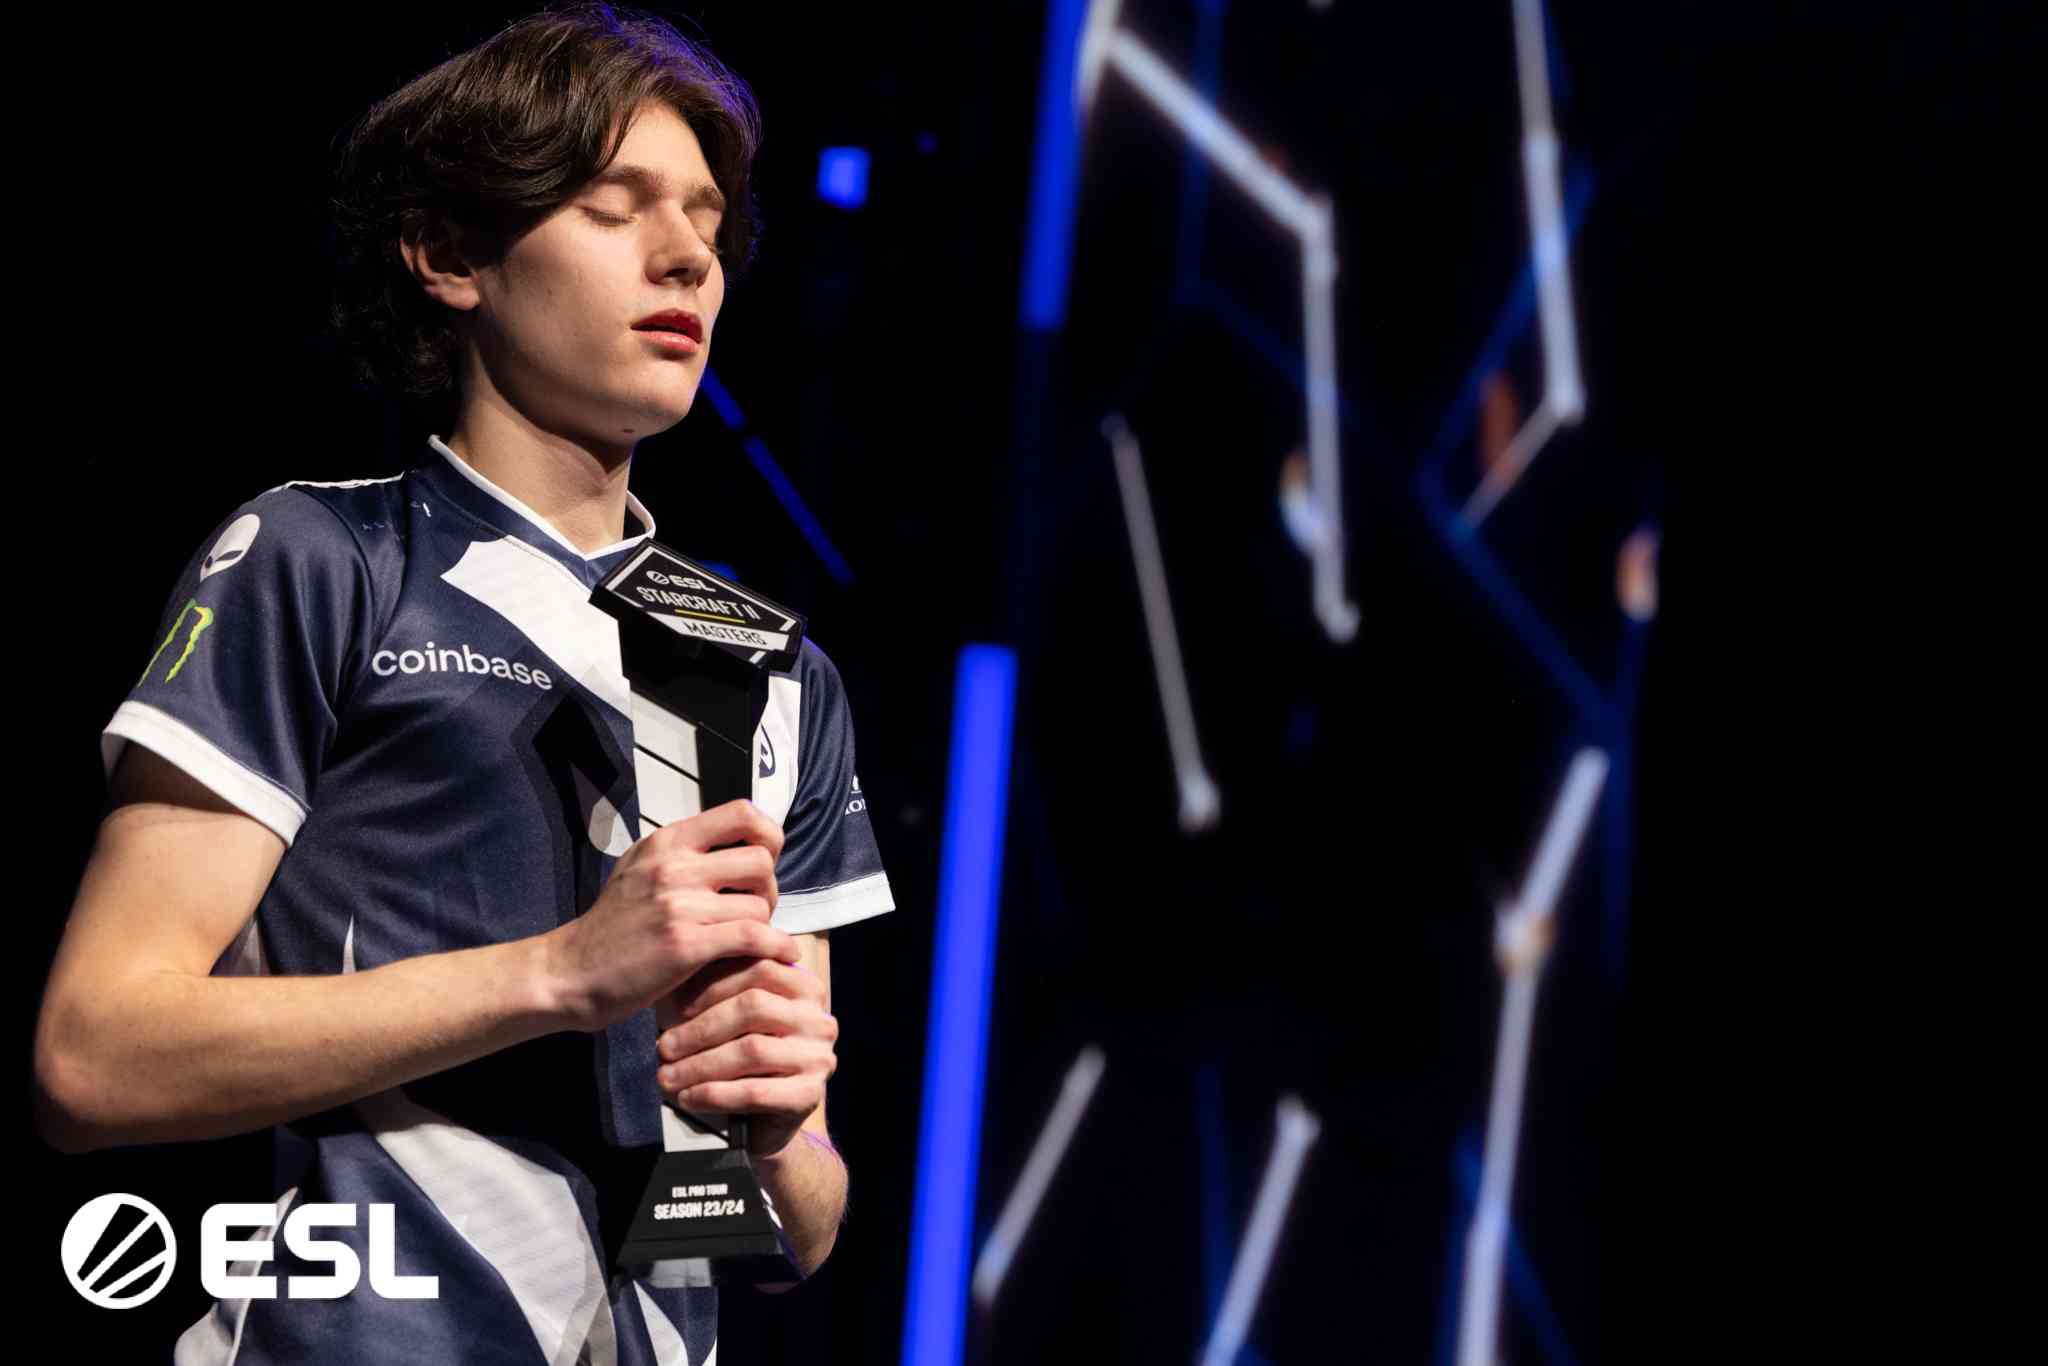 It’s been a long time coming for Clem and his road towards victory. (Image Credits: ESL)